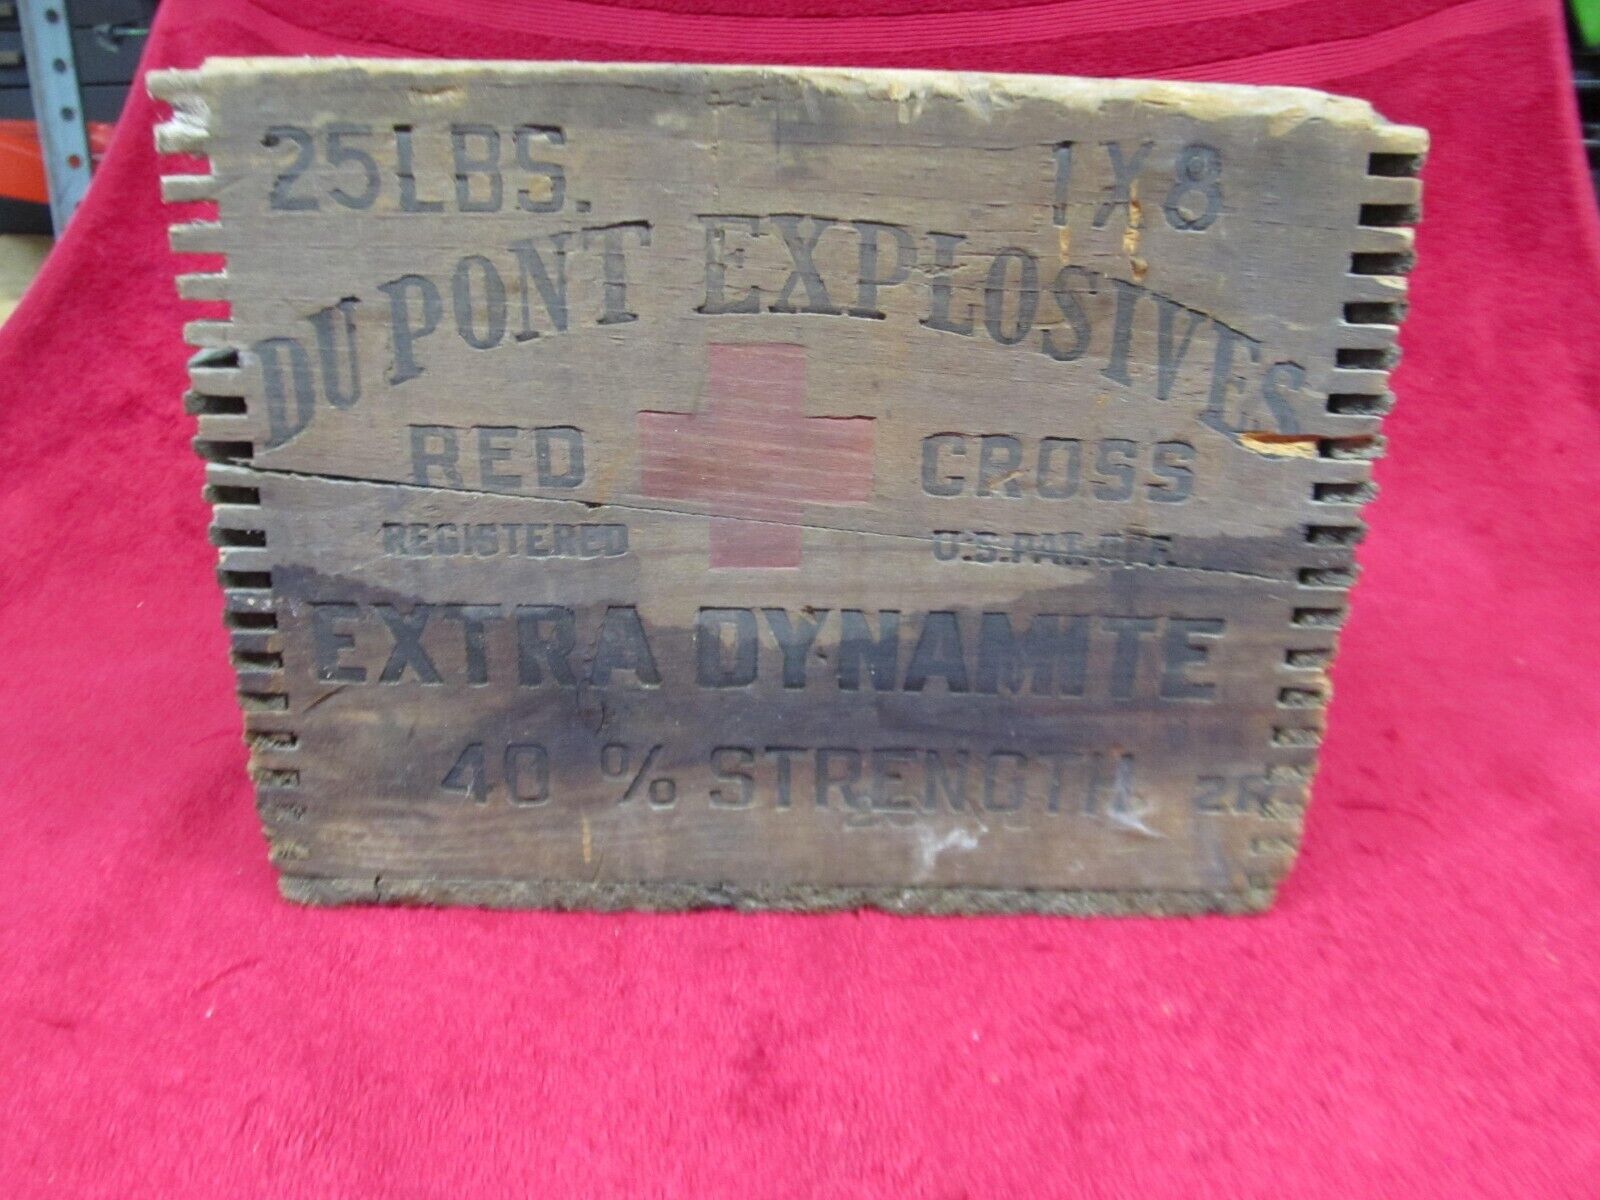 Antique Wooden Dovetail Crate DuPont Explosives Red Cross 40% Extra Dynamite